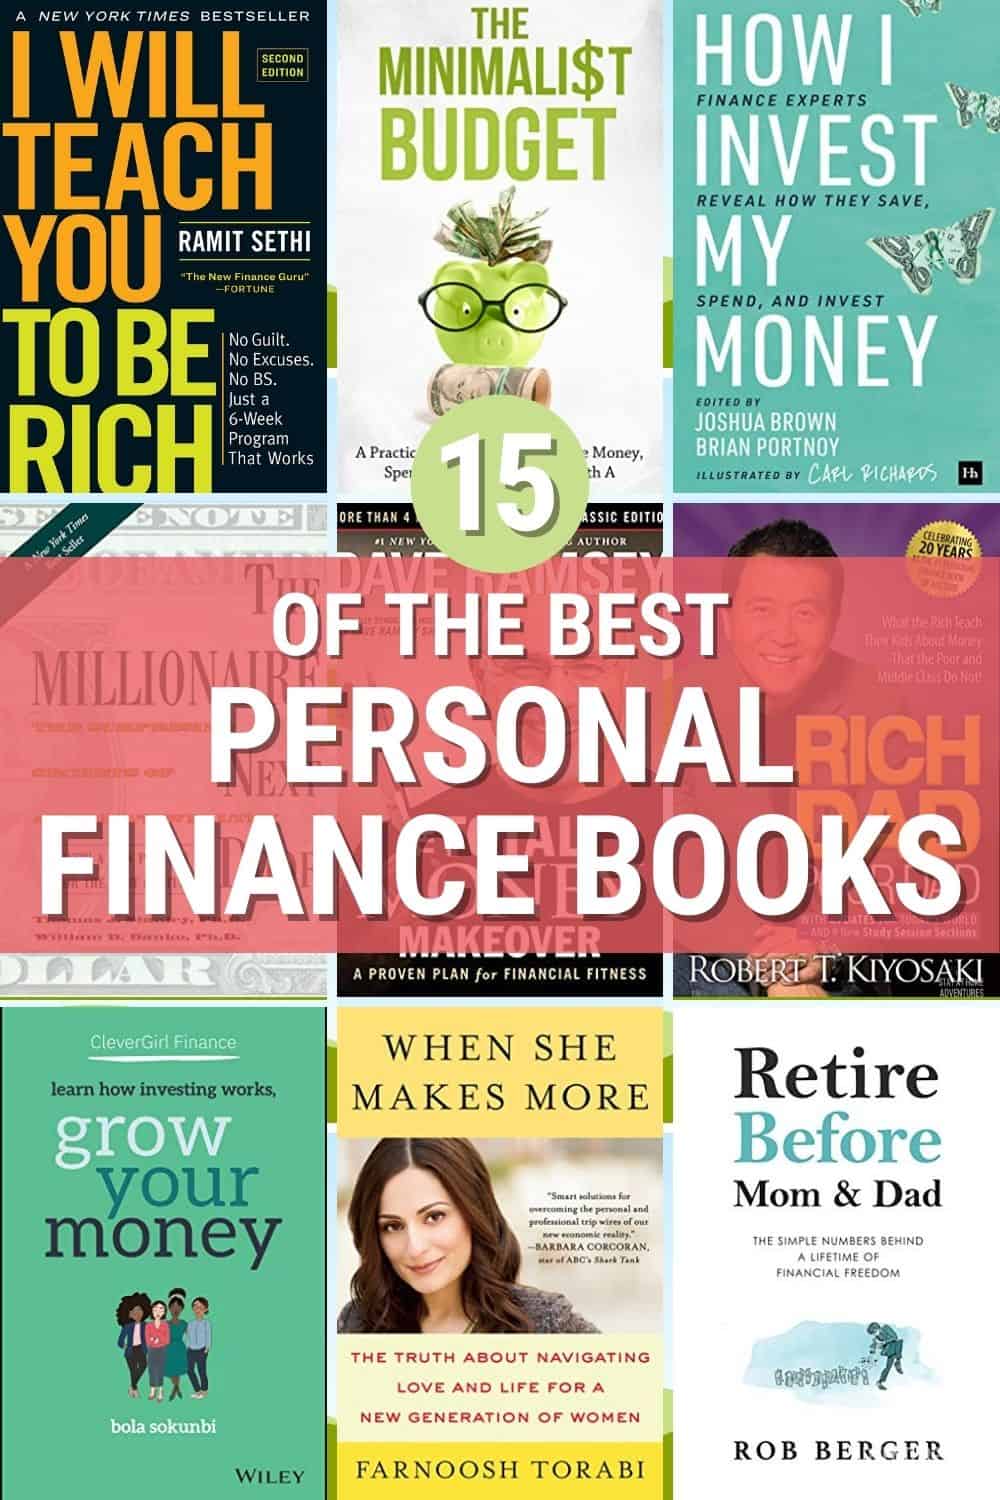 Make sure you read these 15 financial planning books to help you and motivate you with our finances this year. via @mystayathome